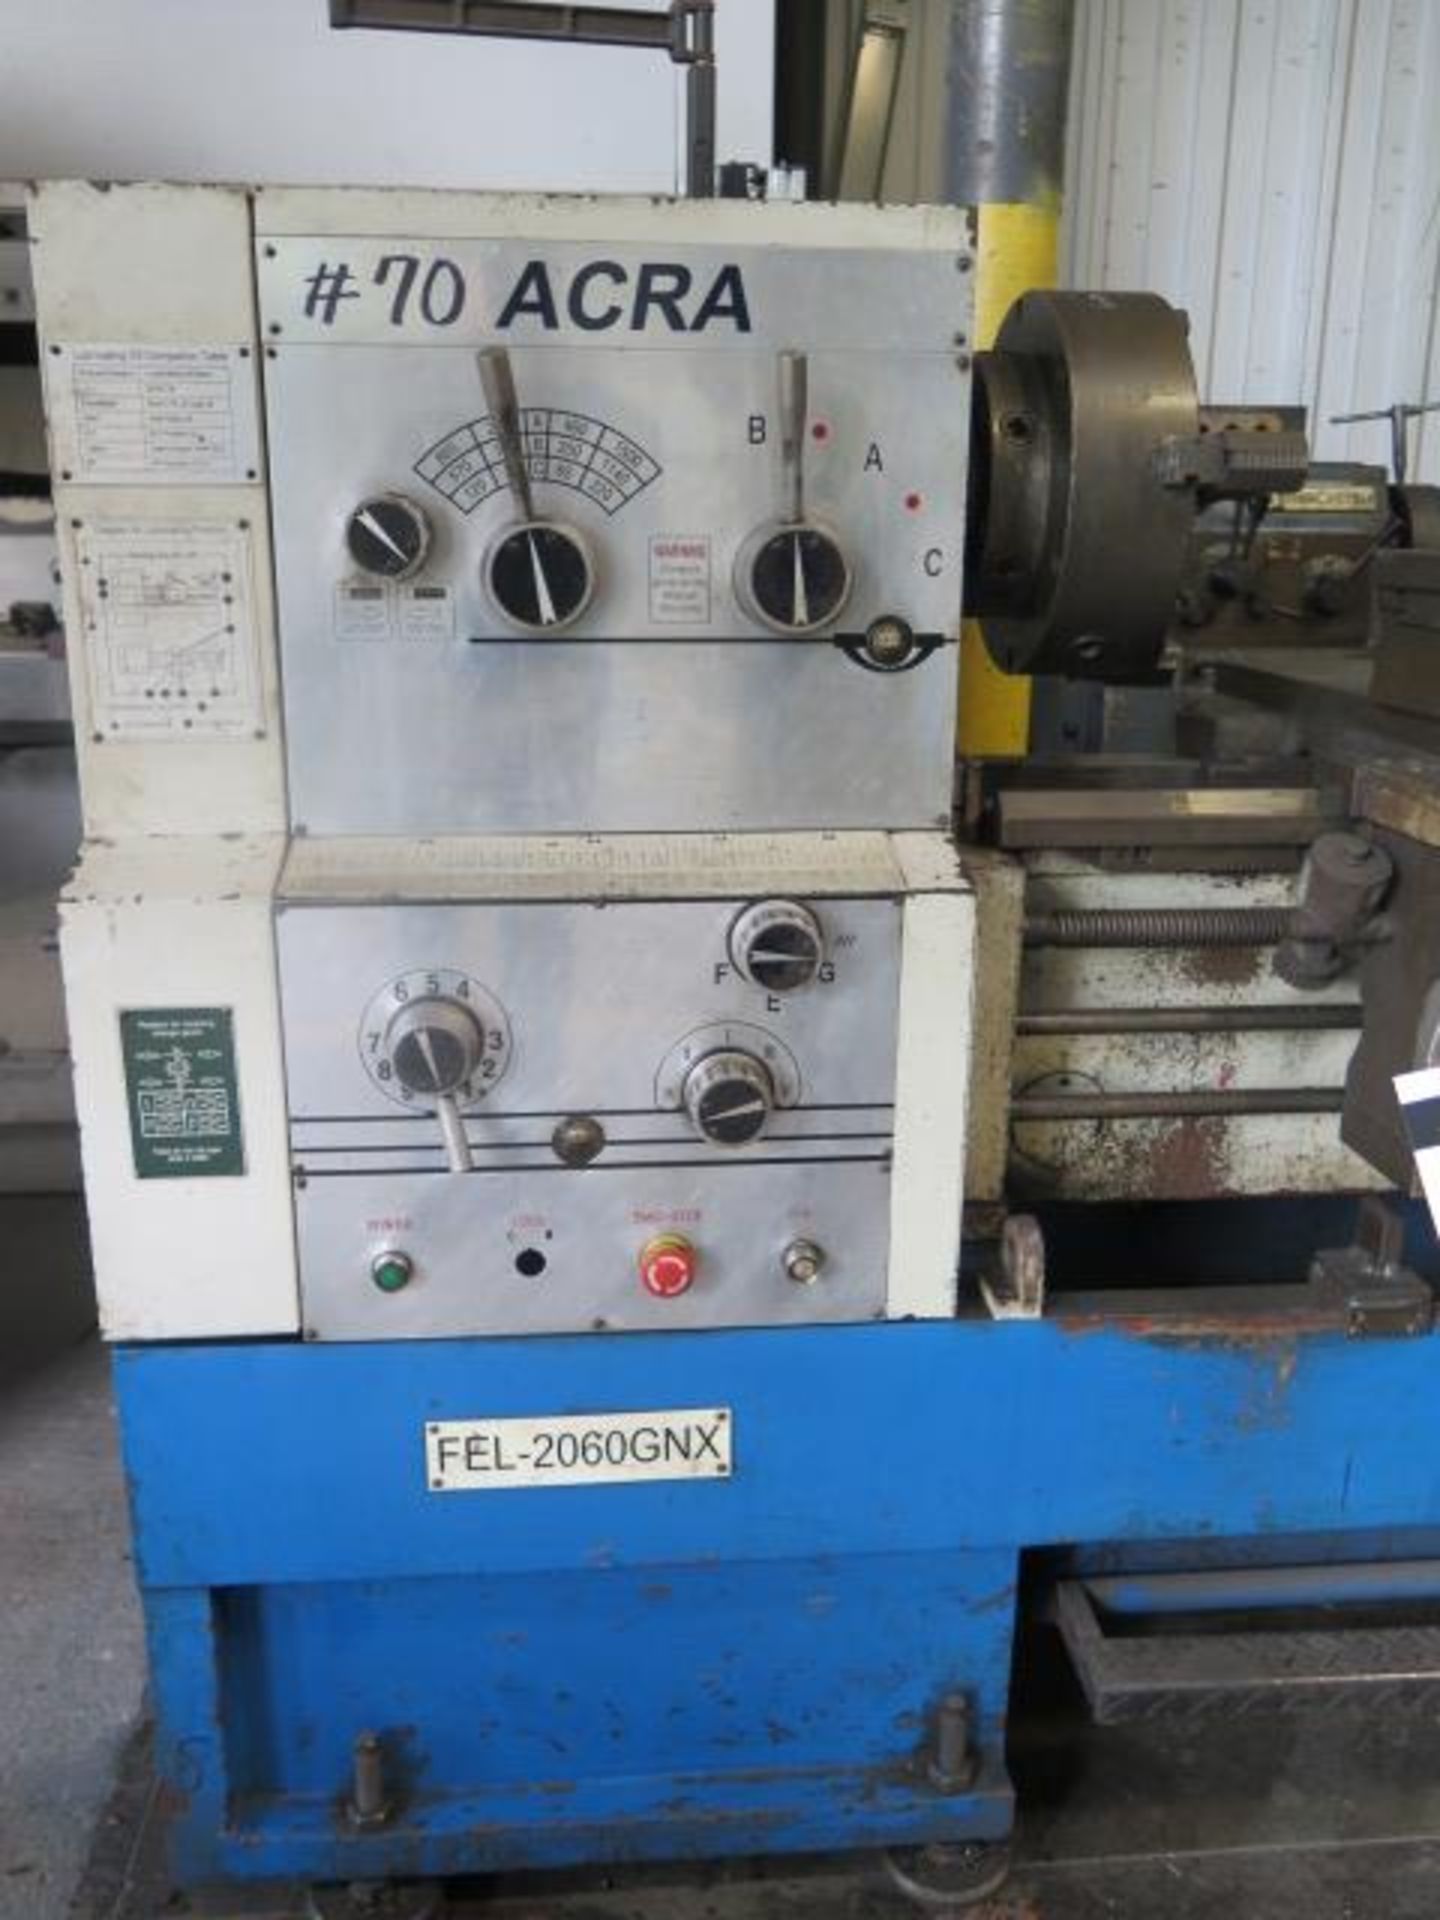 Acra FEL-2060GNX 20” x 60” Geared Head Gap Lathe w/ 32-1500 RPM, 3 1/8” Thru Spindle Bore,SOLD AS IS - Image 4 of 16